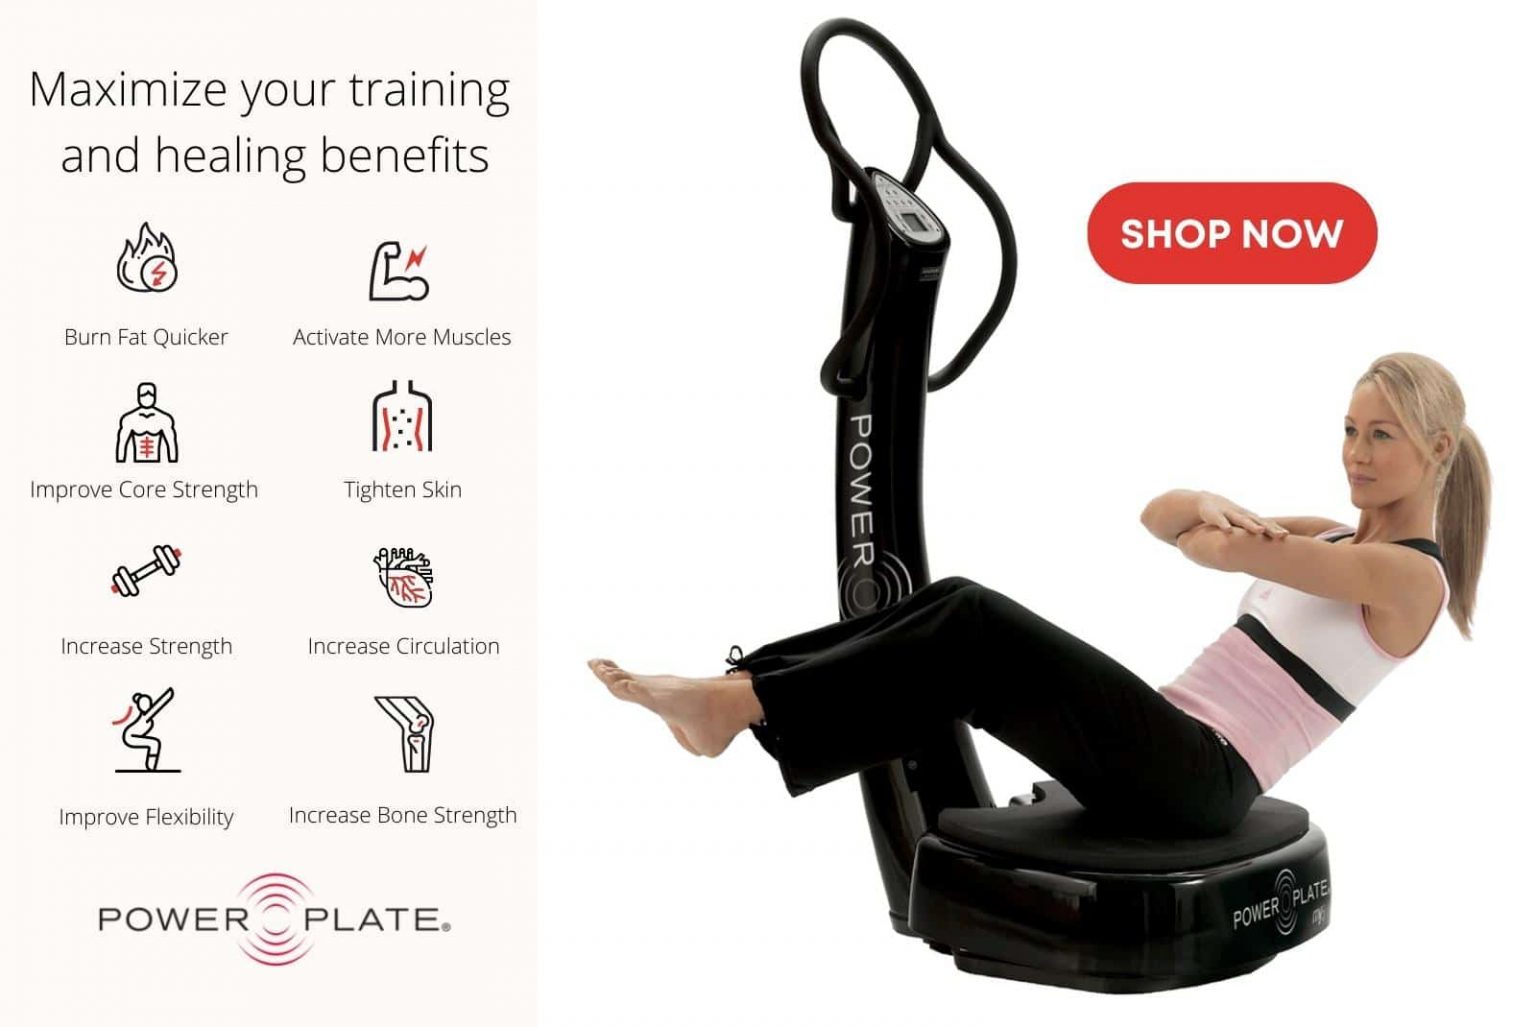 Maximize your training and health benefits with the Power Plate my5